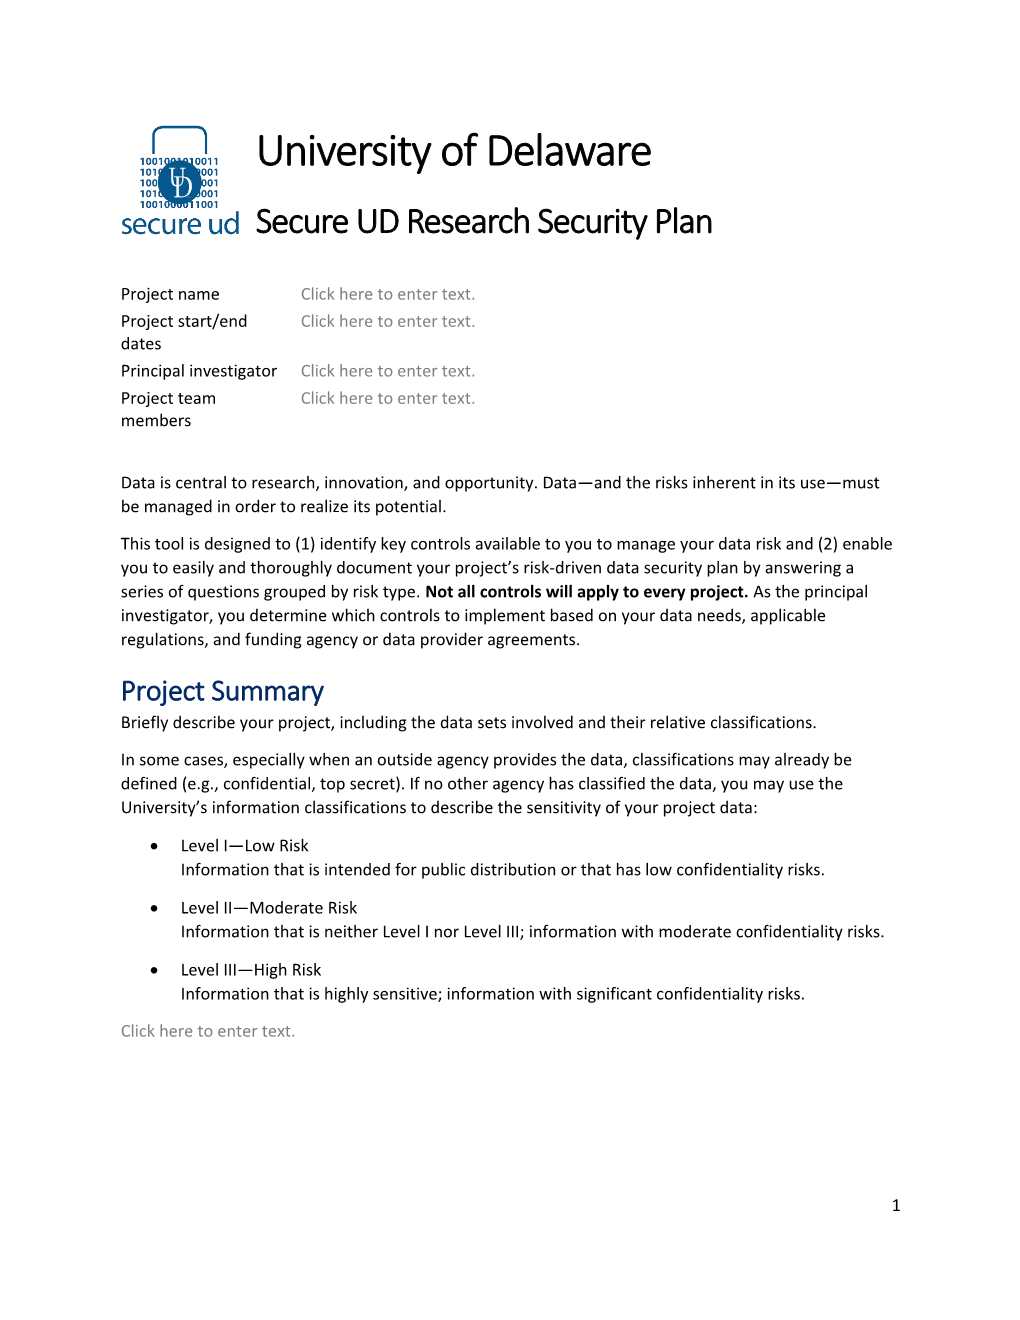 Secure UD Research Security Plan